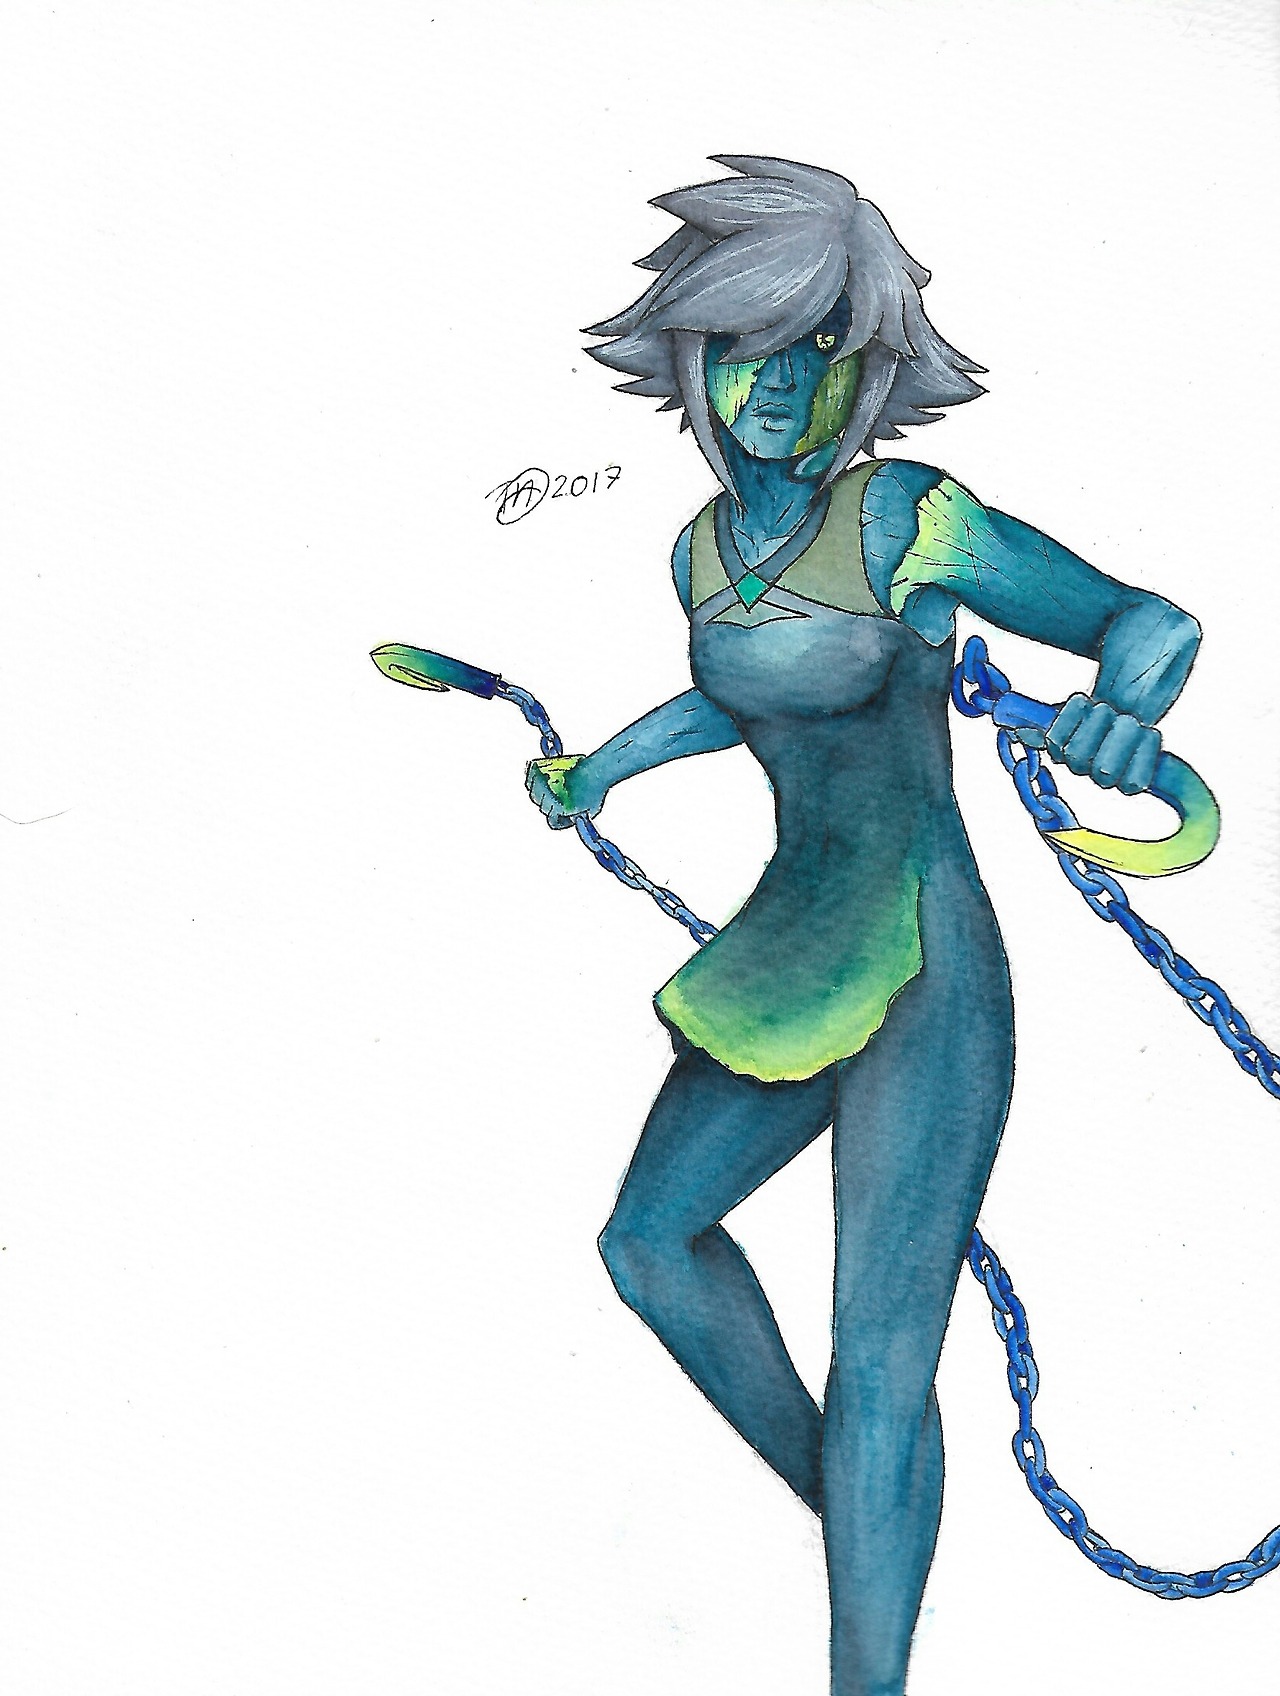 I bought a gorgeous piece of labradorite and I fell in love with it so I had to make a gemsona for it Didn’t turn out exactly how id like but EH